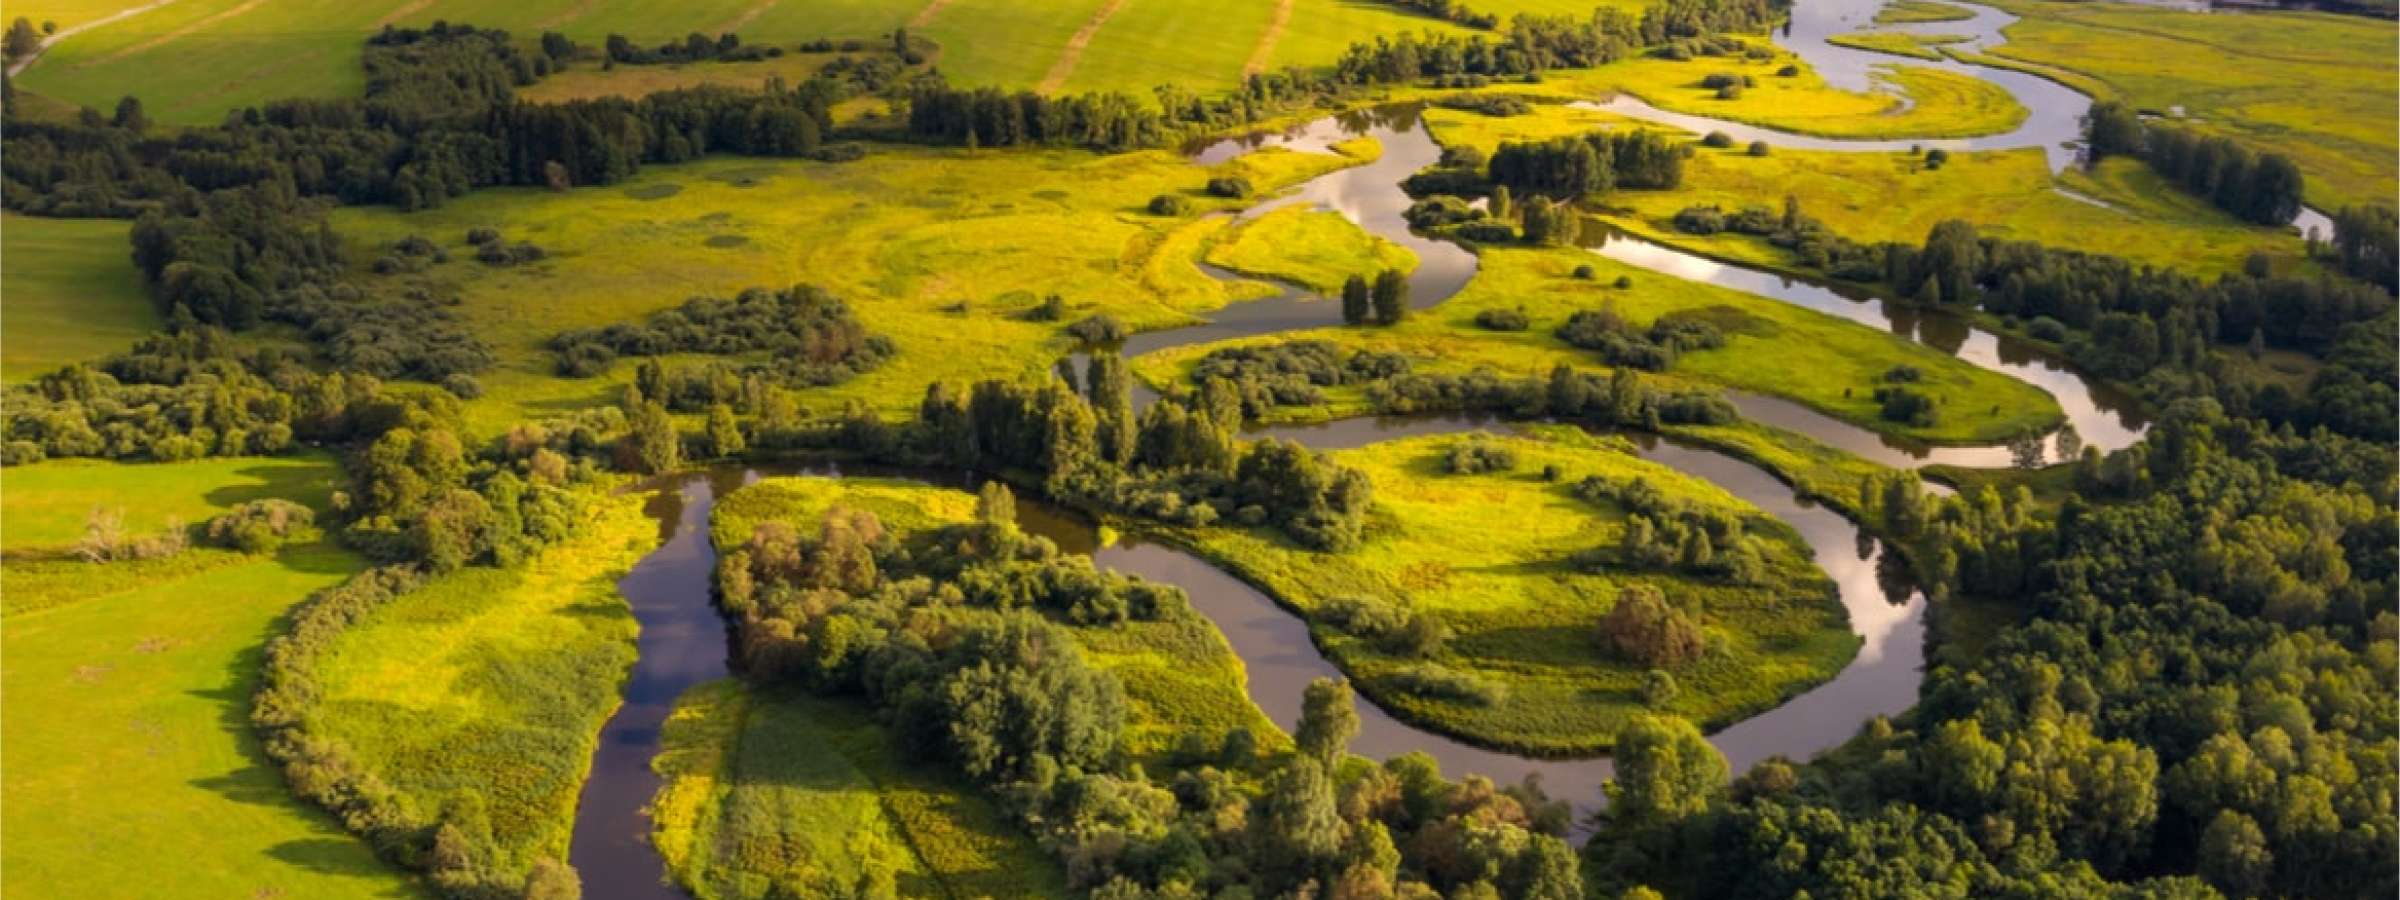 River flowing through green fields and hills.